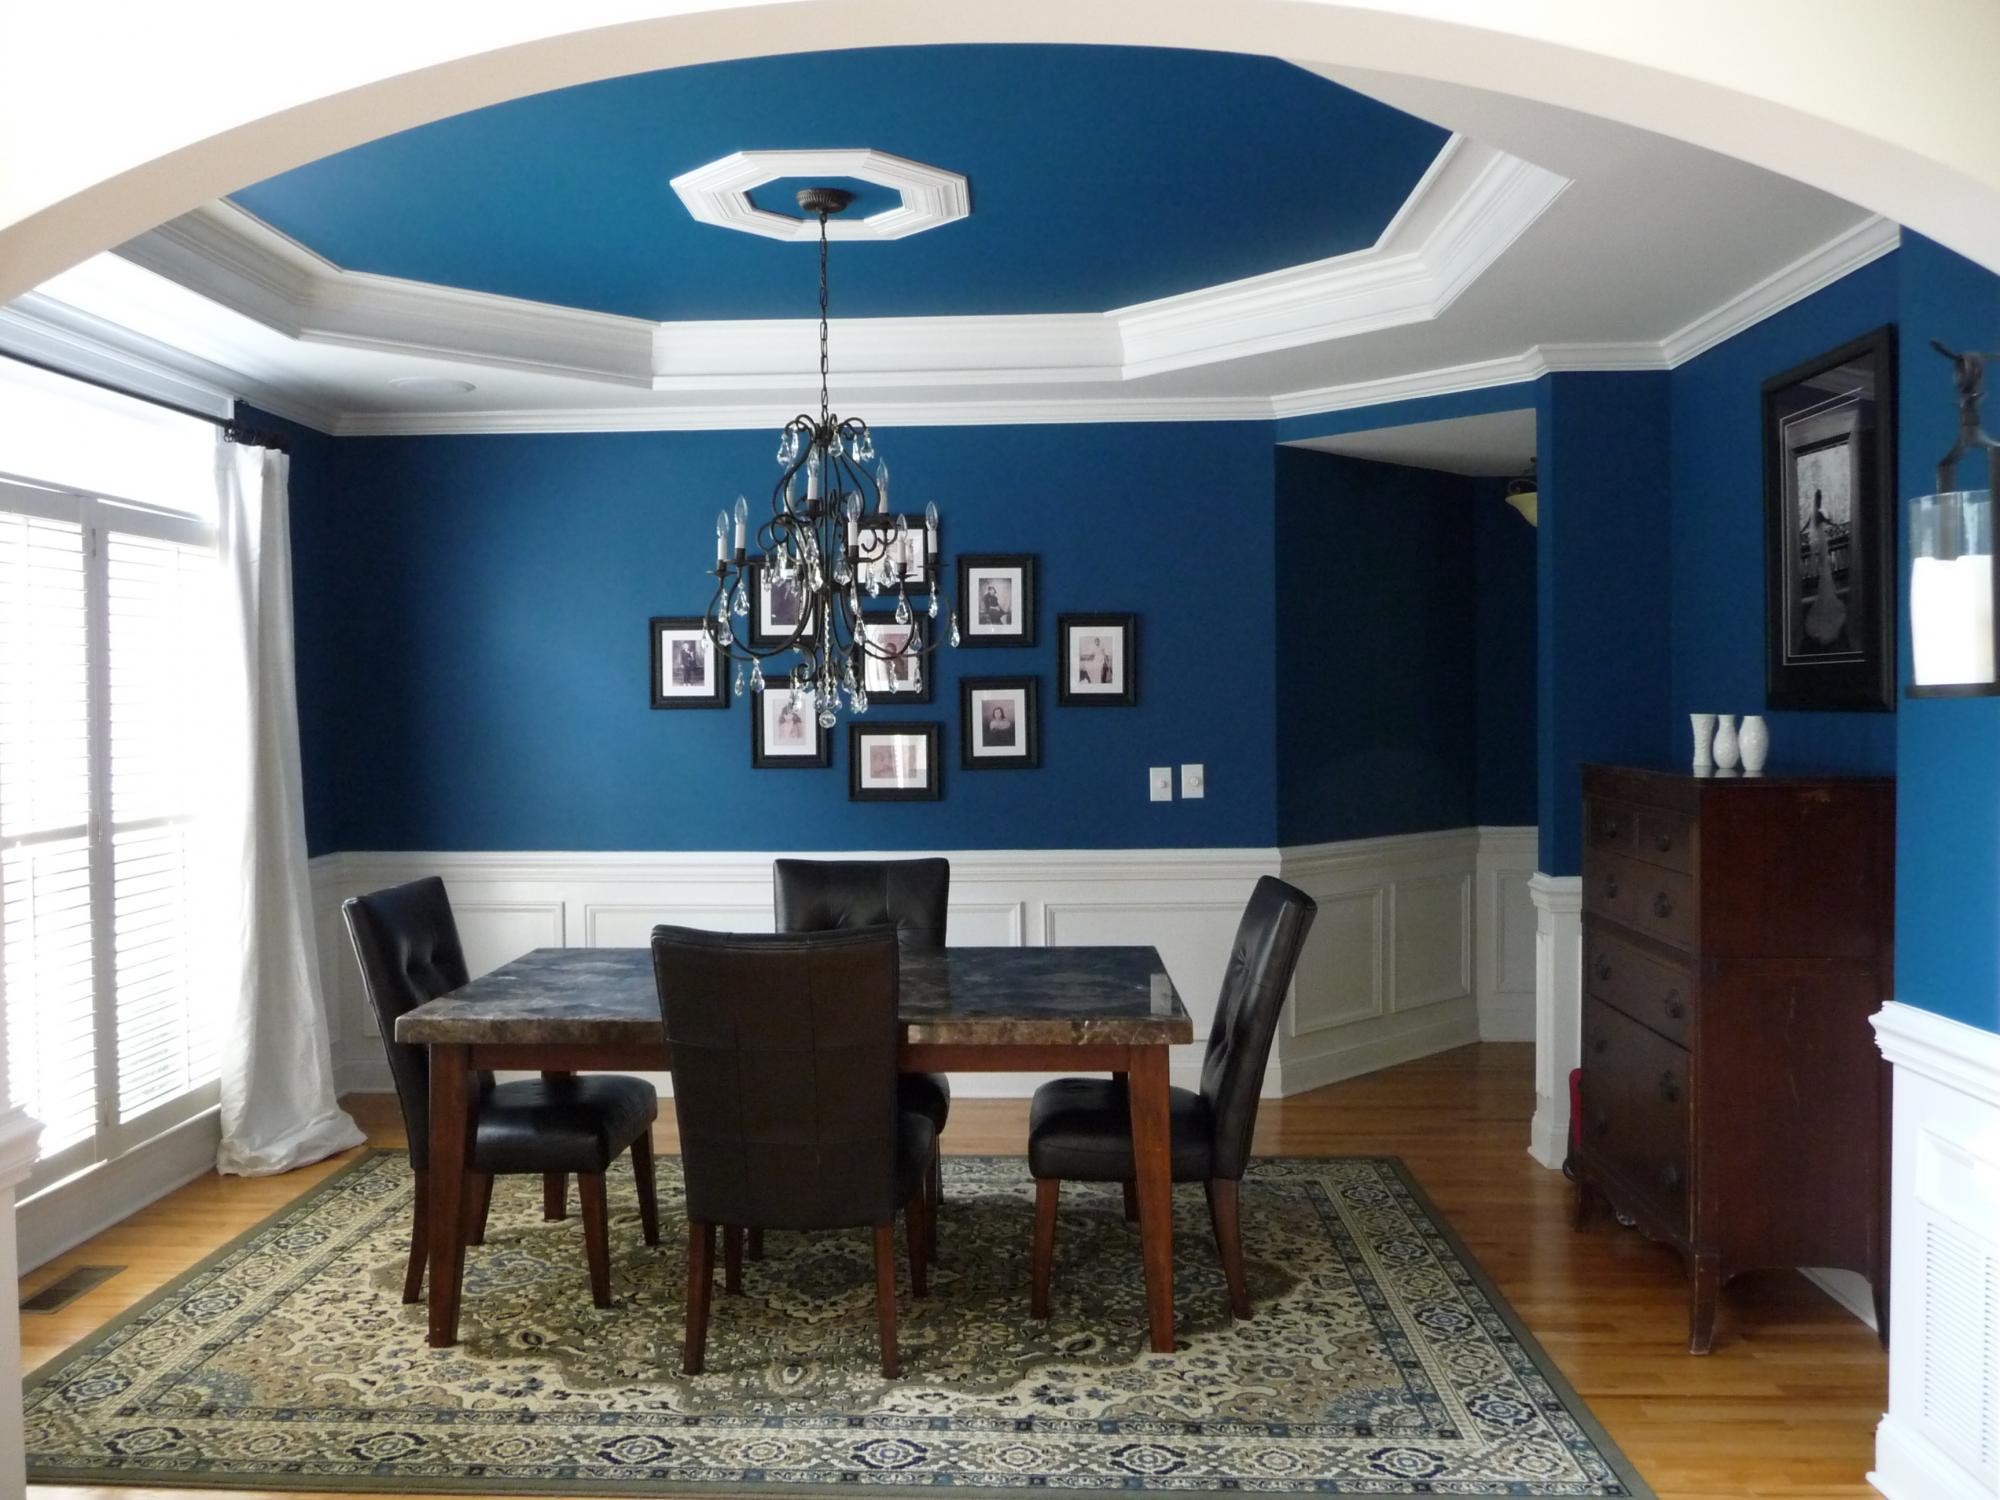 A oceanside dining room with blue walls and black furniture.